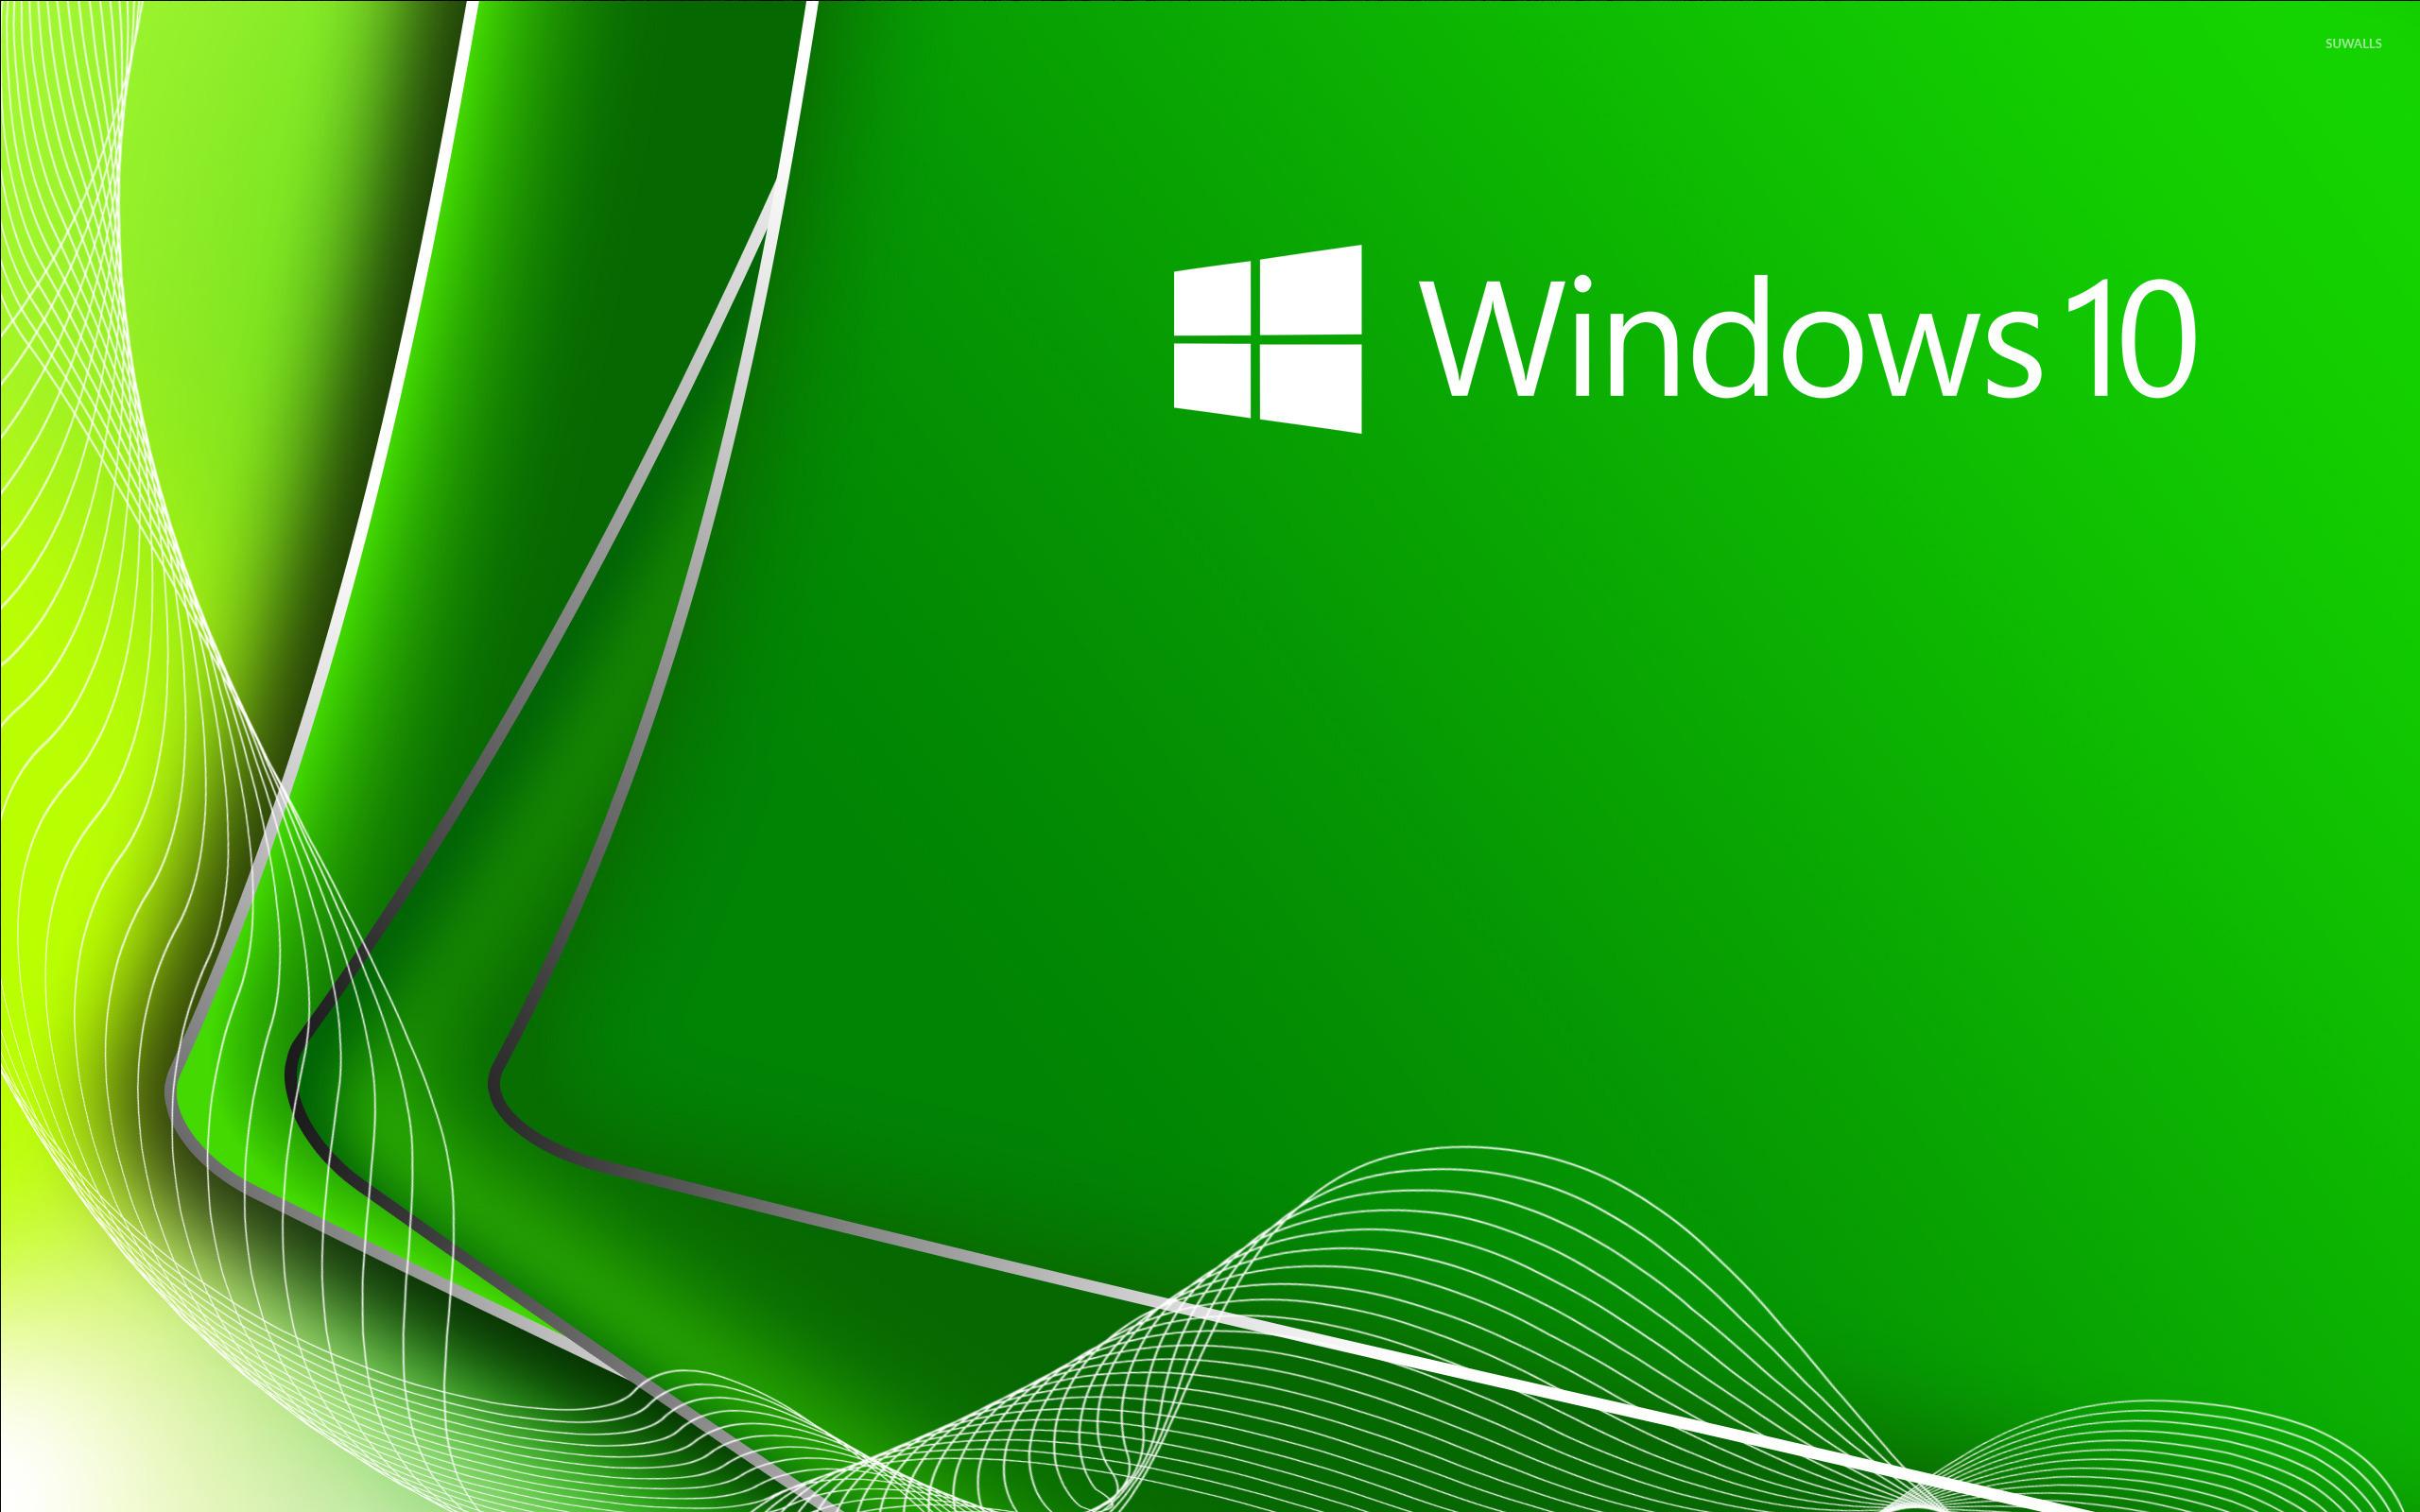 Windows 10 white text logo on green curners wallpaper